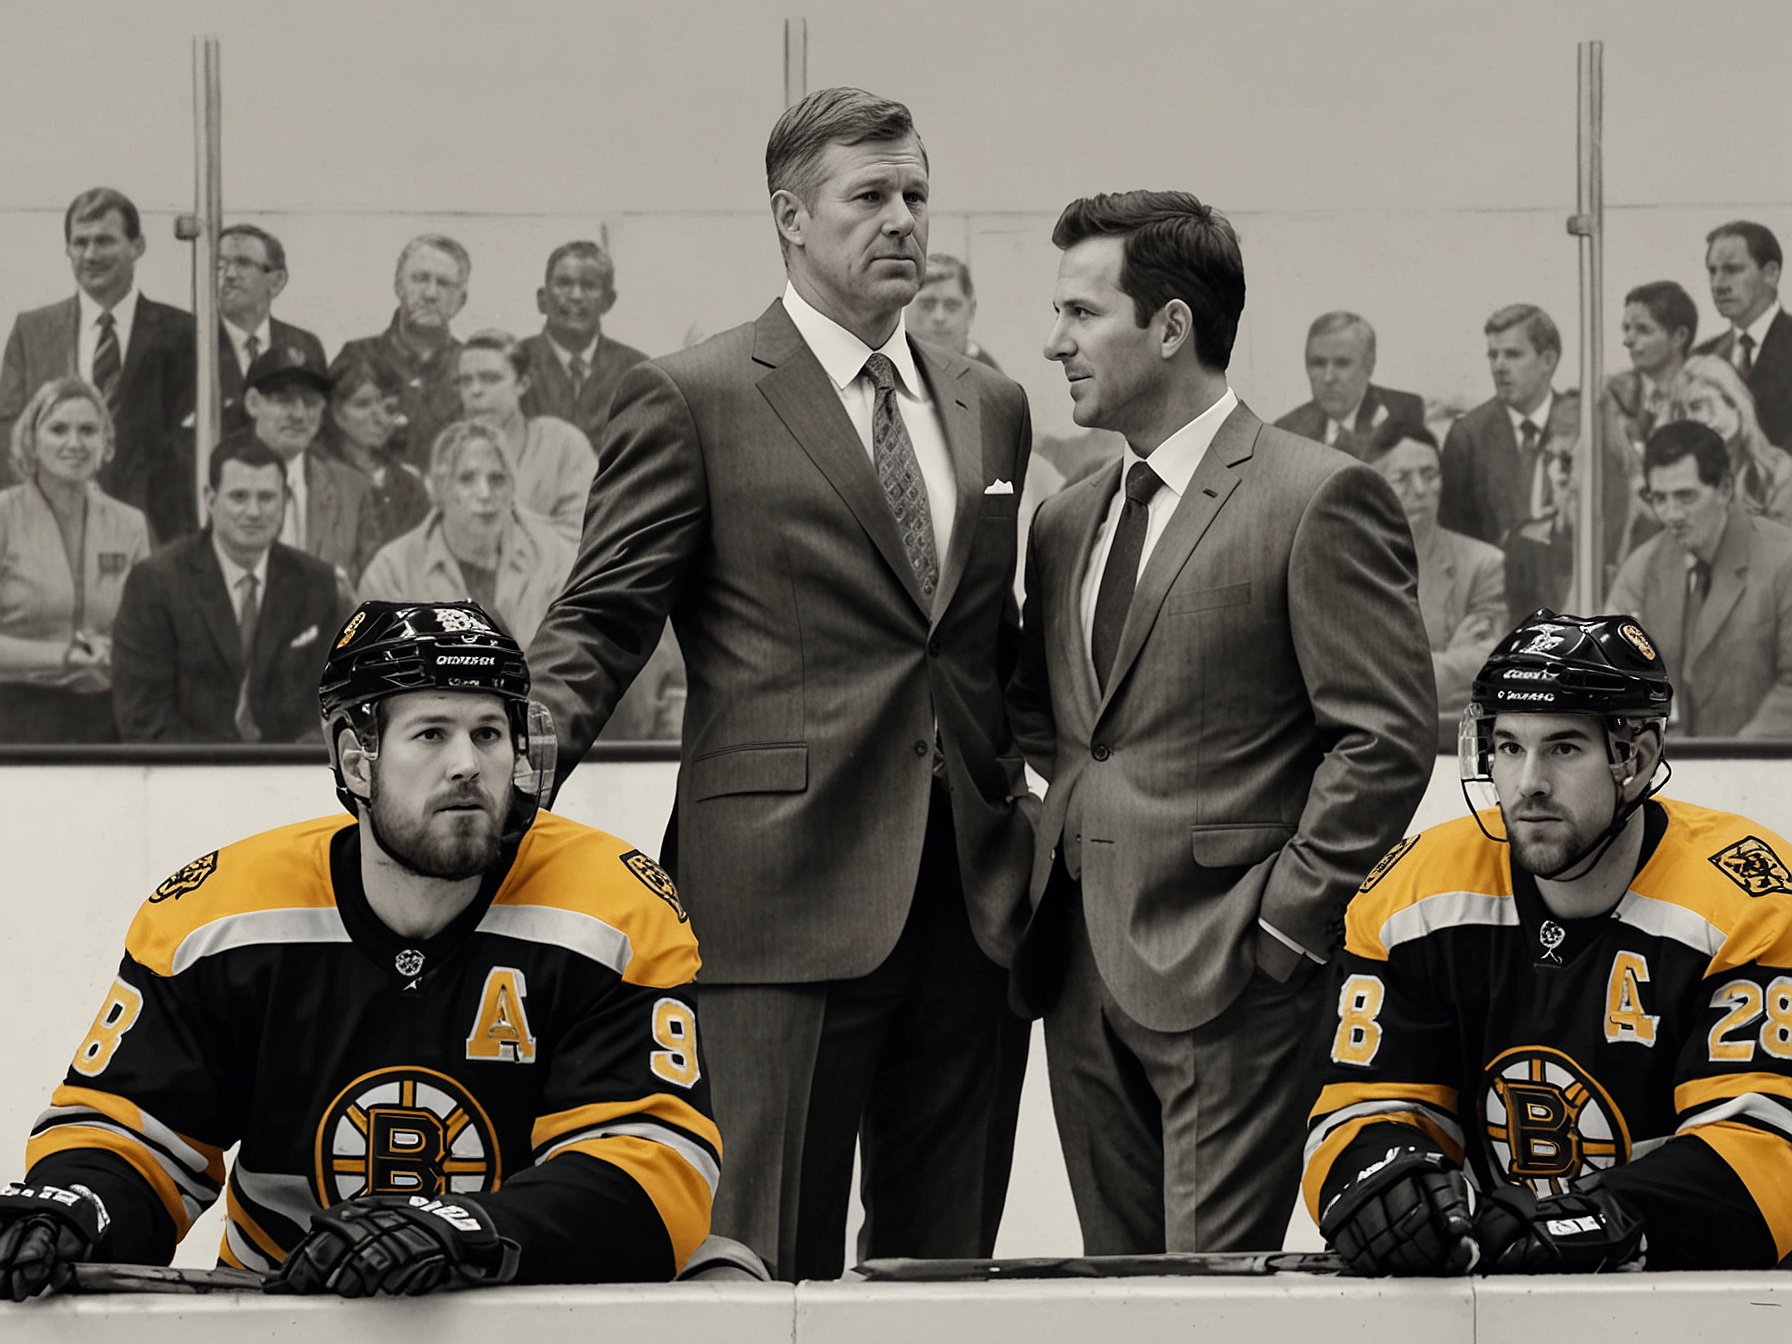 An image of the Boston Bruins coaching staff during a game, representing the evaluation and potential restructuring of their roles to improve team performance.